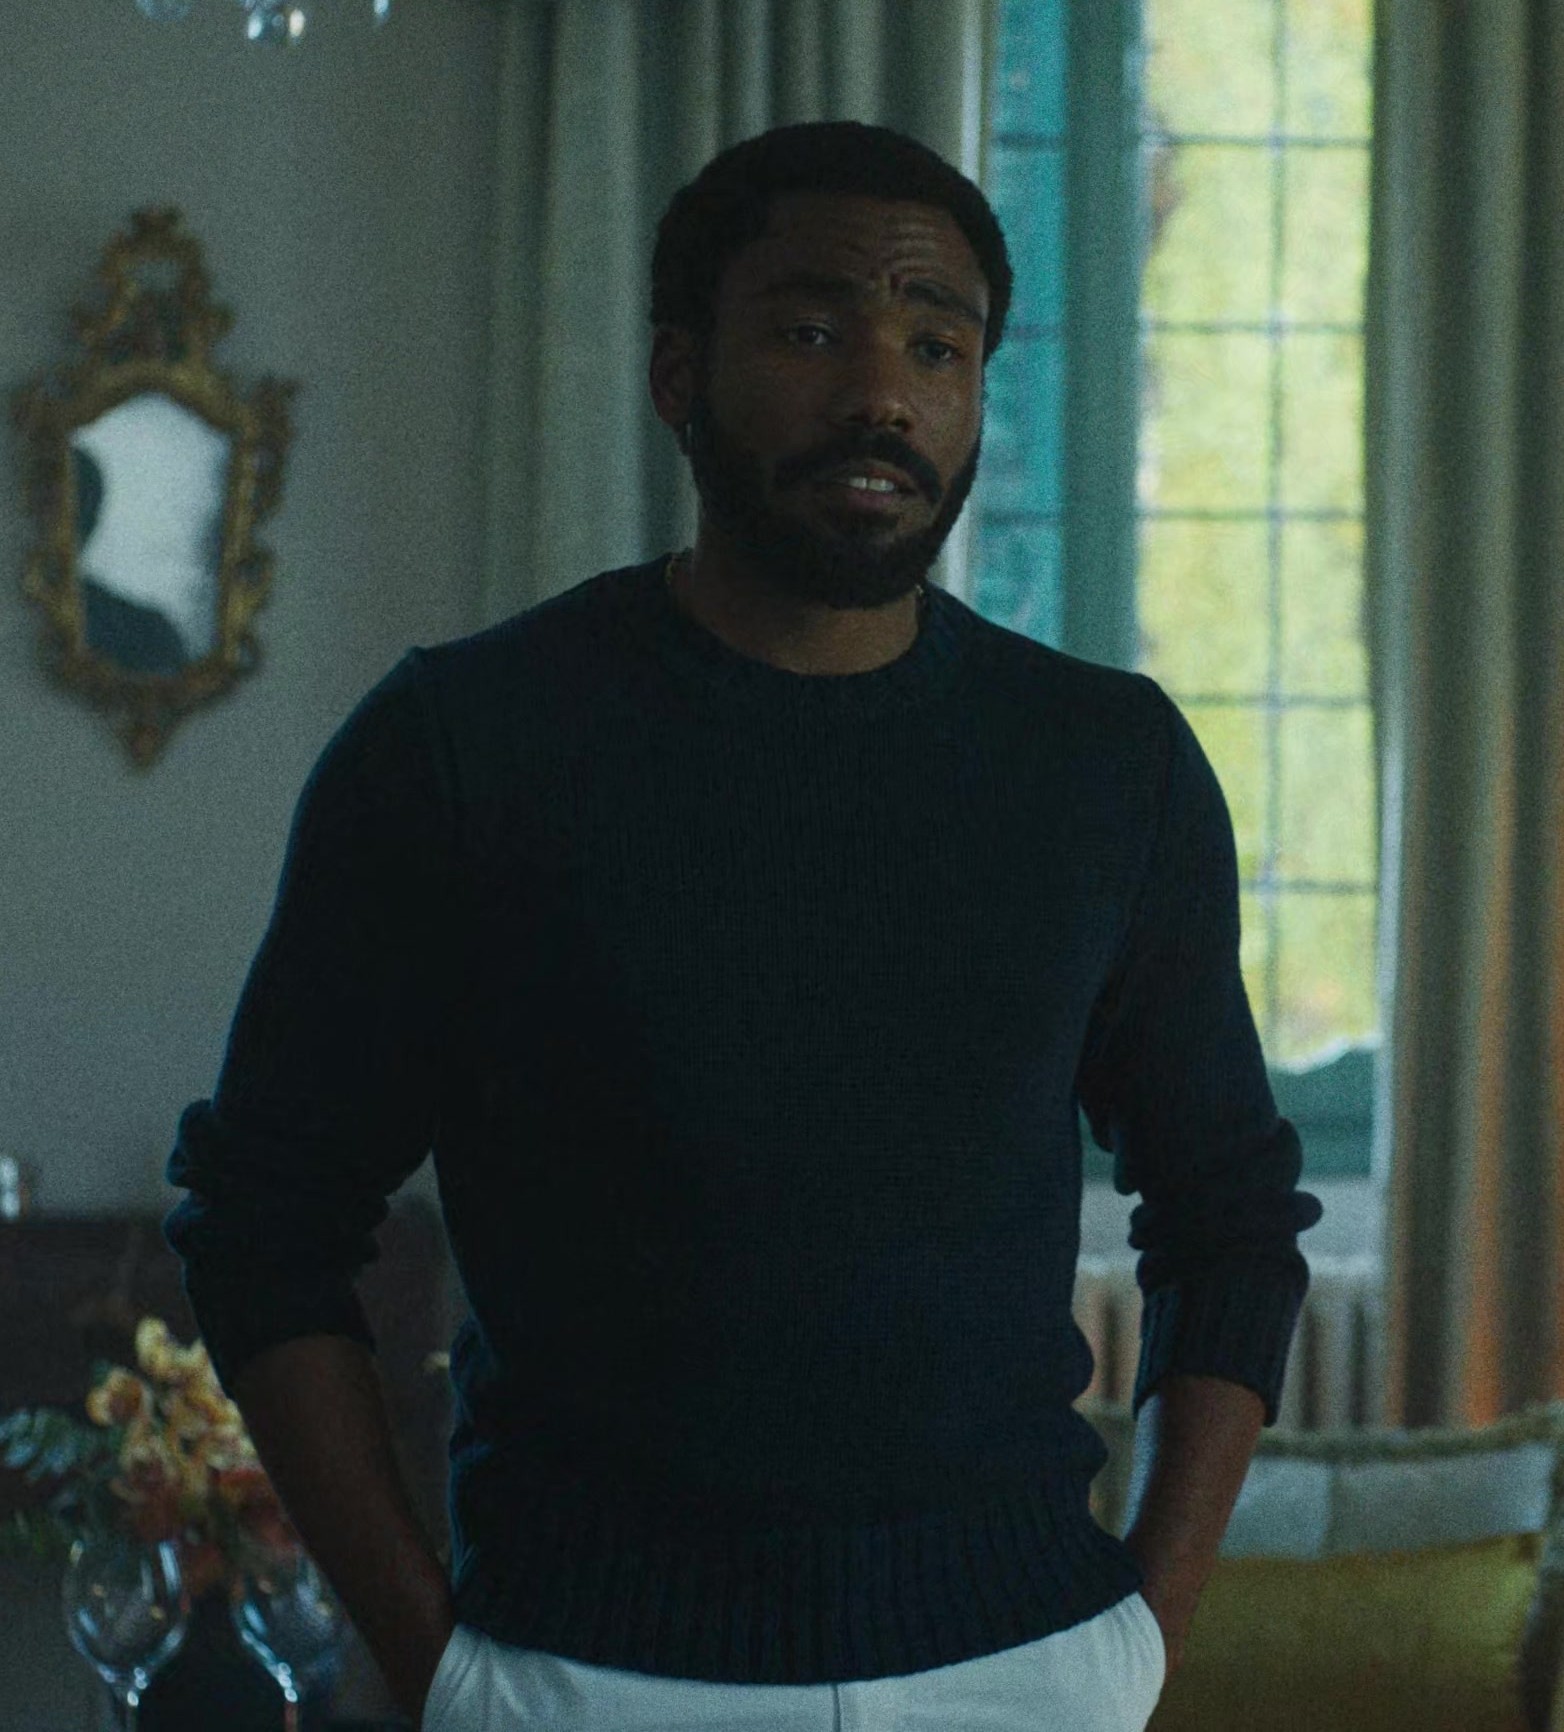 Worn on Mr. & Mrs. Smith TV Show - Blue Crew Neck Knit Sweater Worn by Donald Glover as John Smith